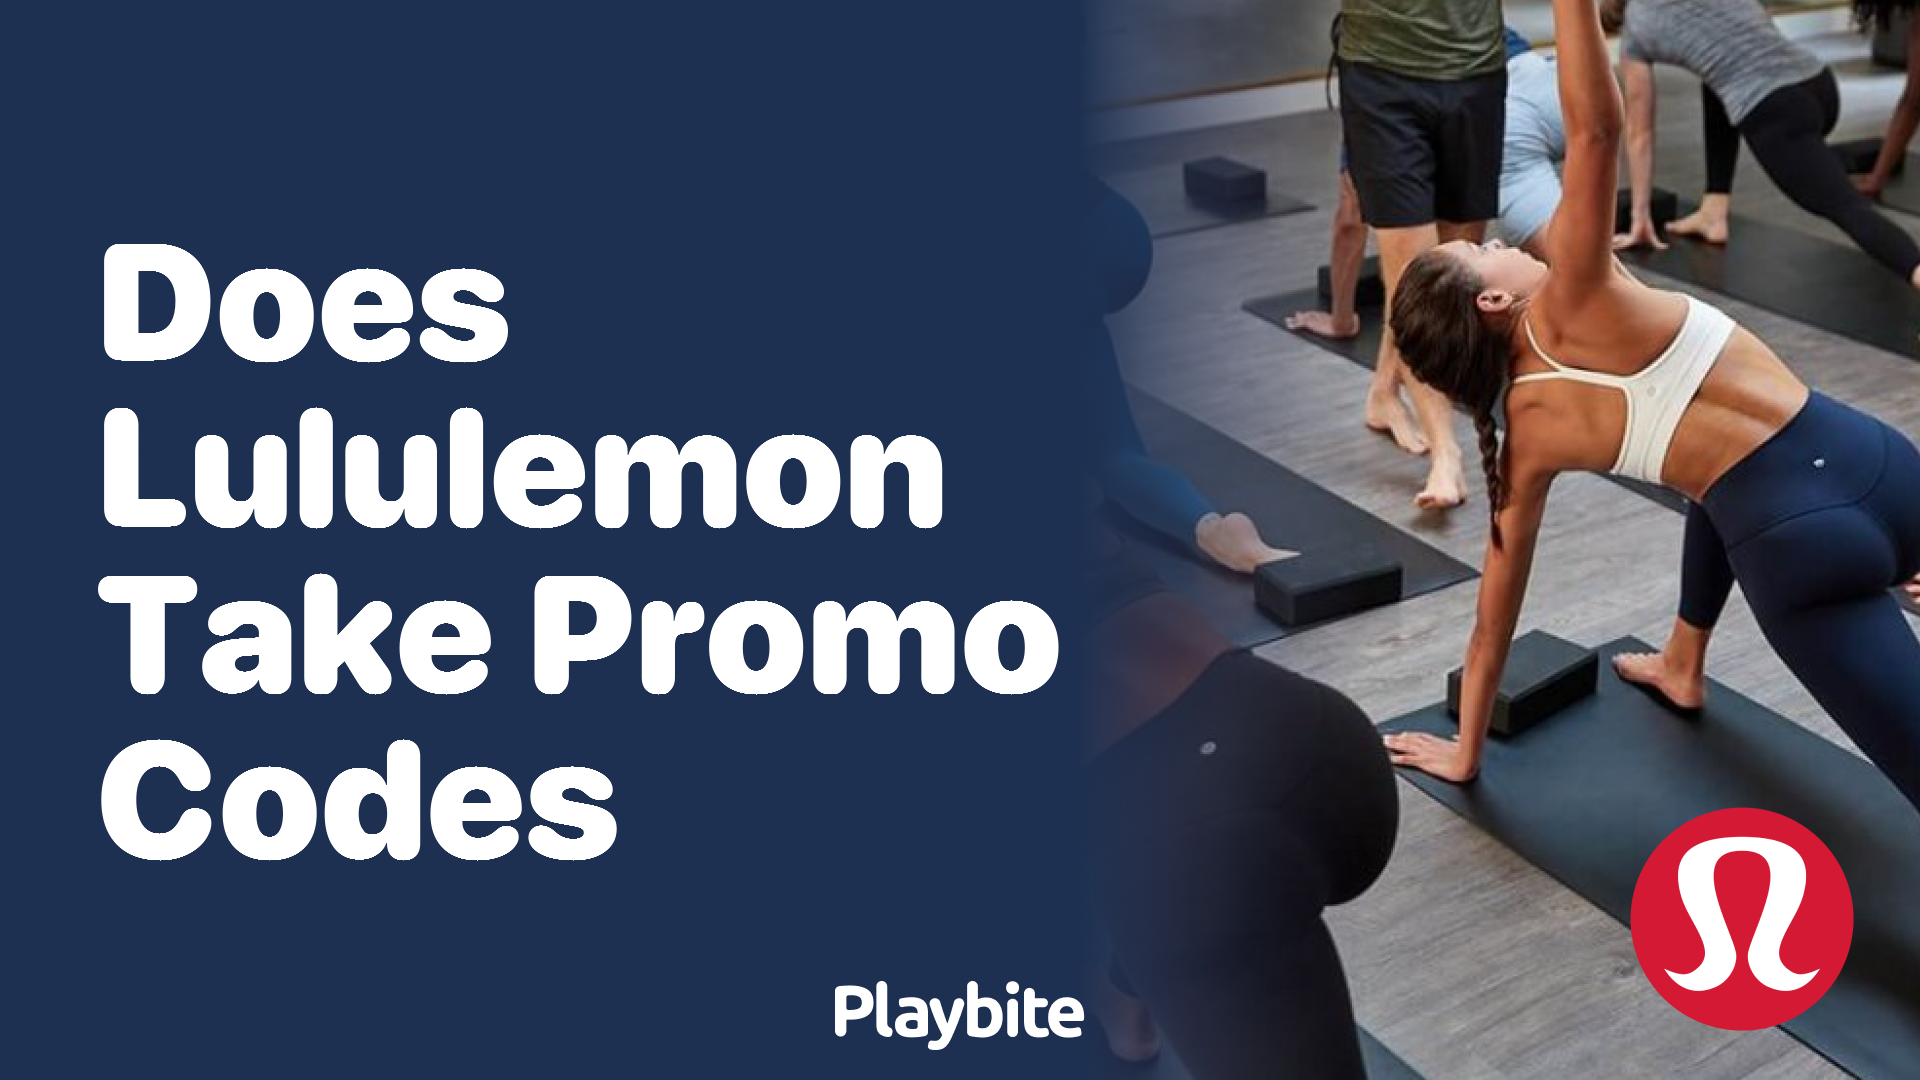 Does Lululemon Accept Promo Codes? Find Out Here! - Playbite